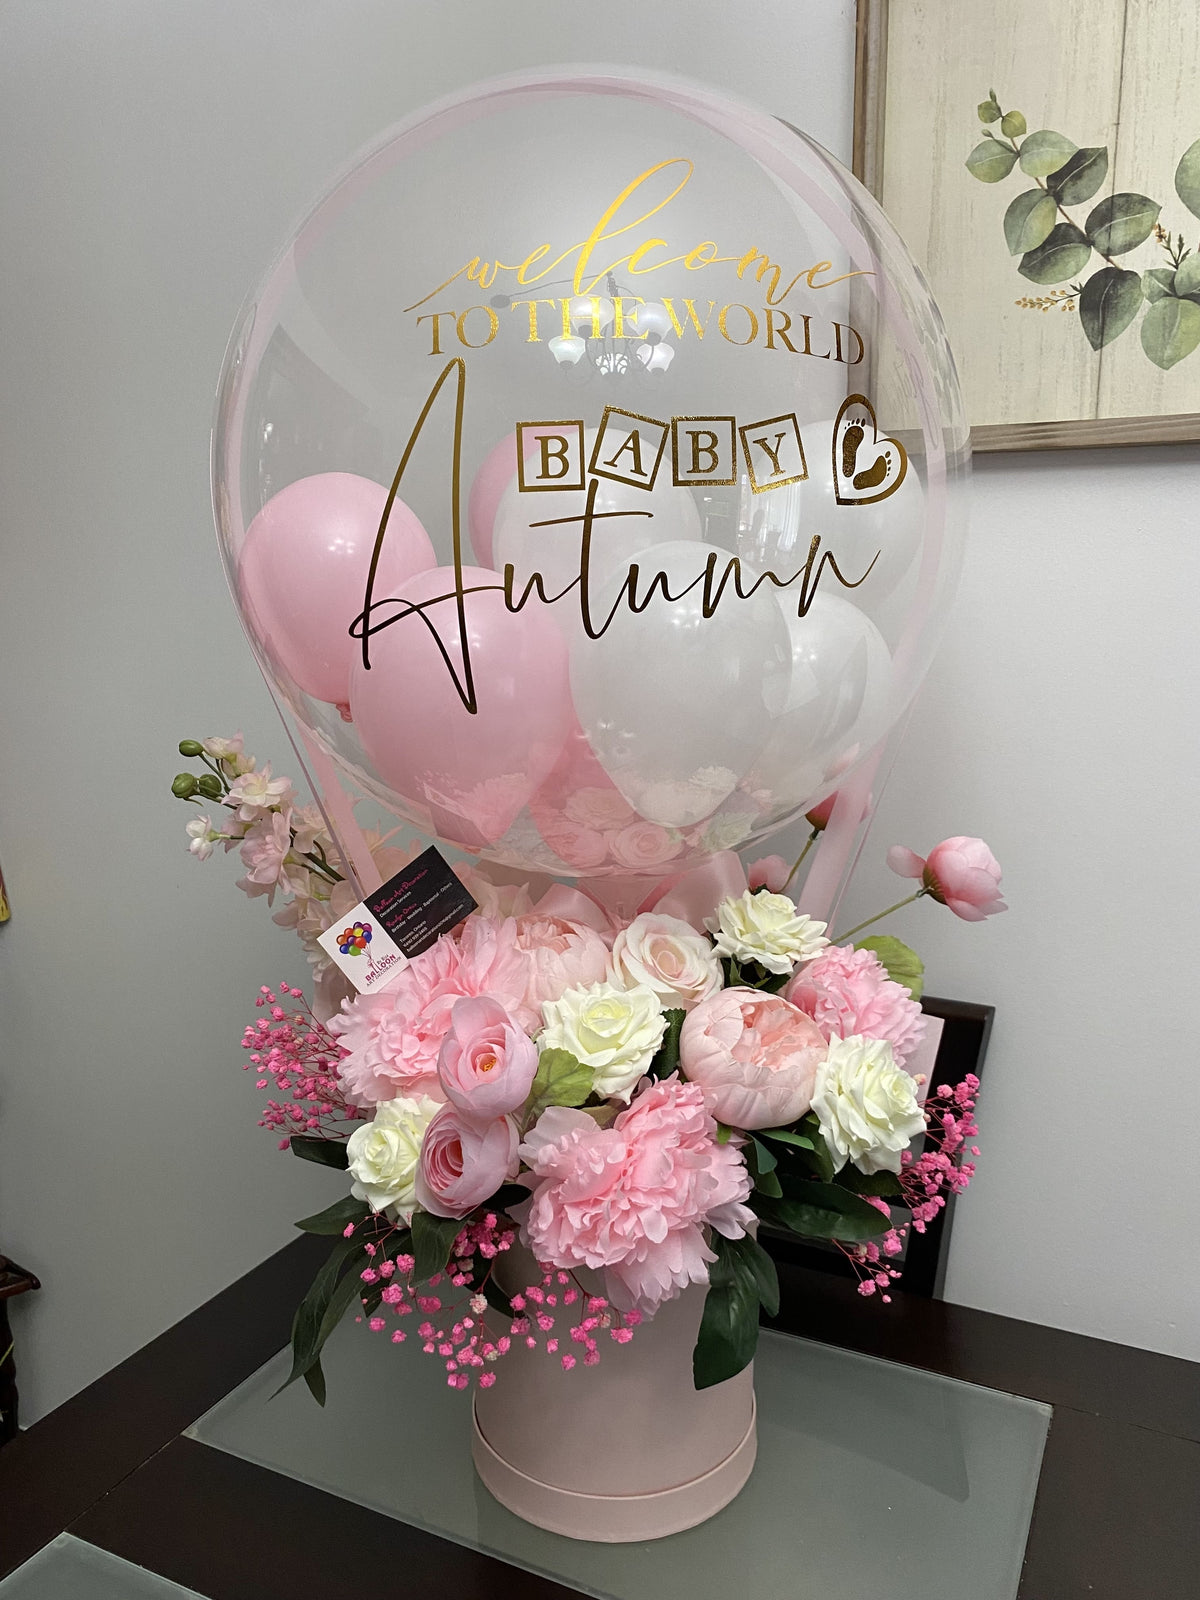 Balloon with flowers